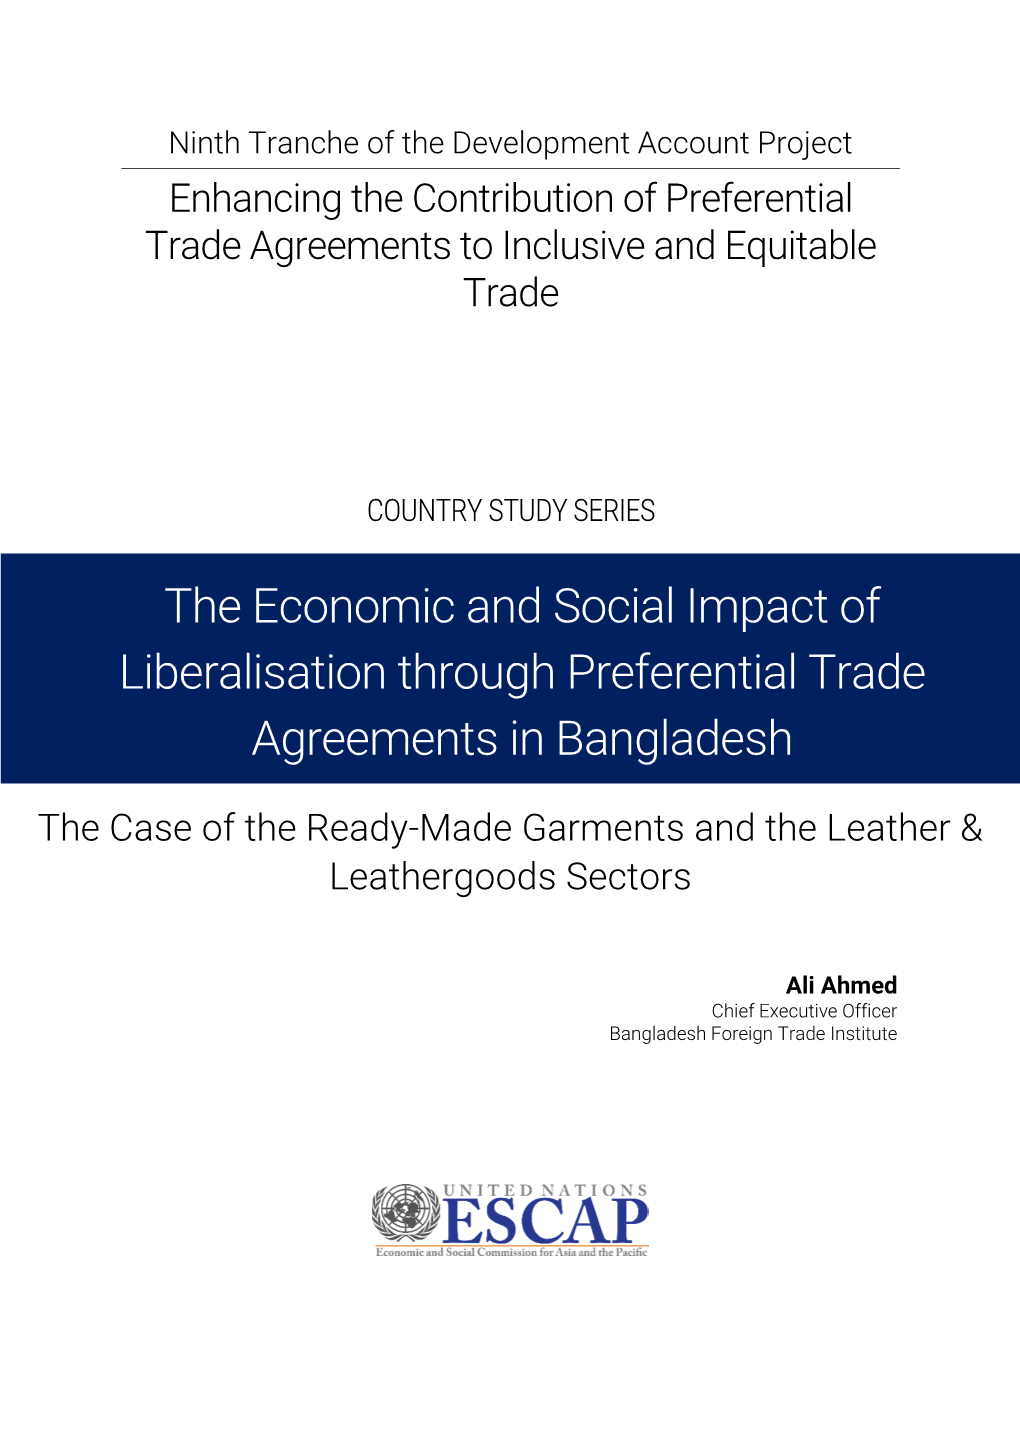 The Economic and Social Impact of Liberalisation Through Preferential Trade